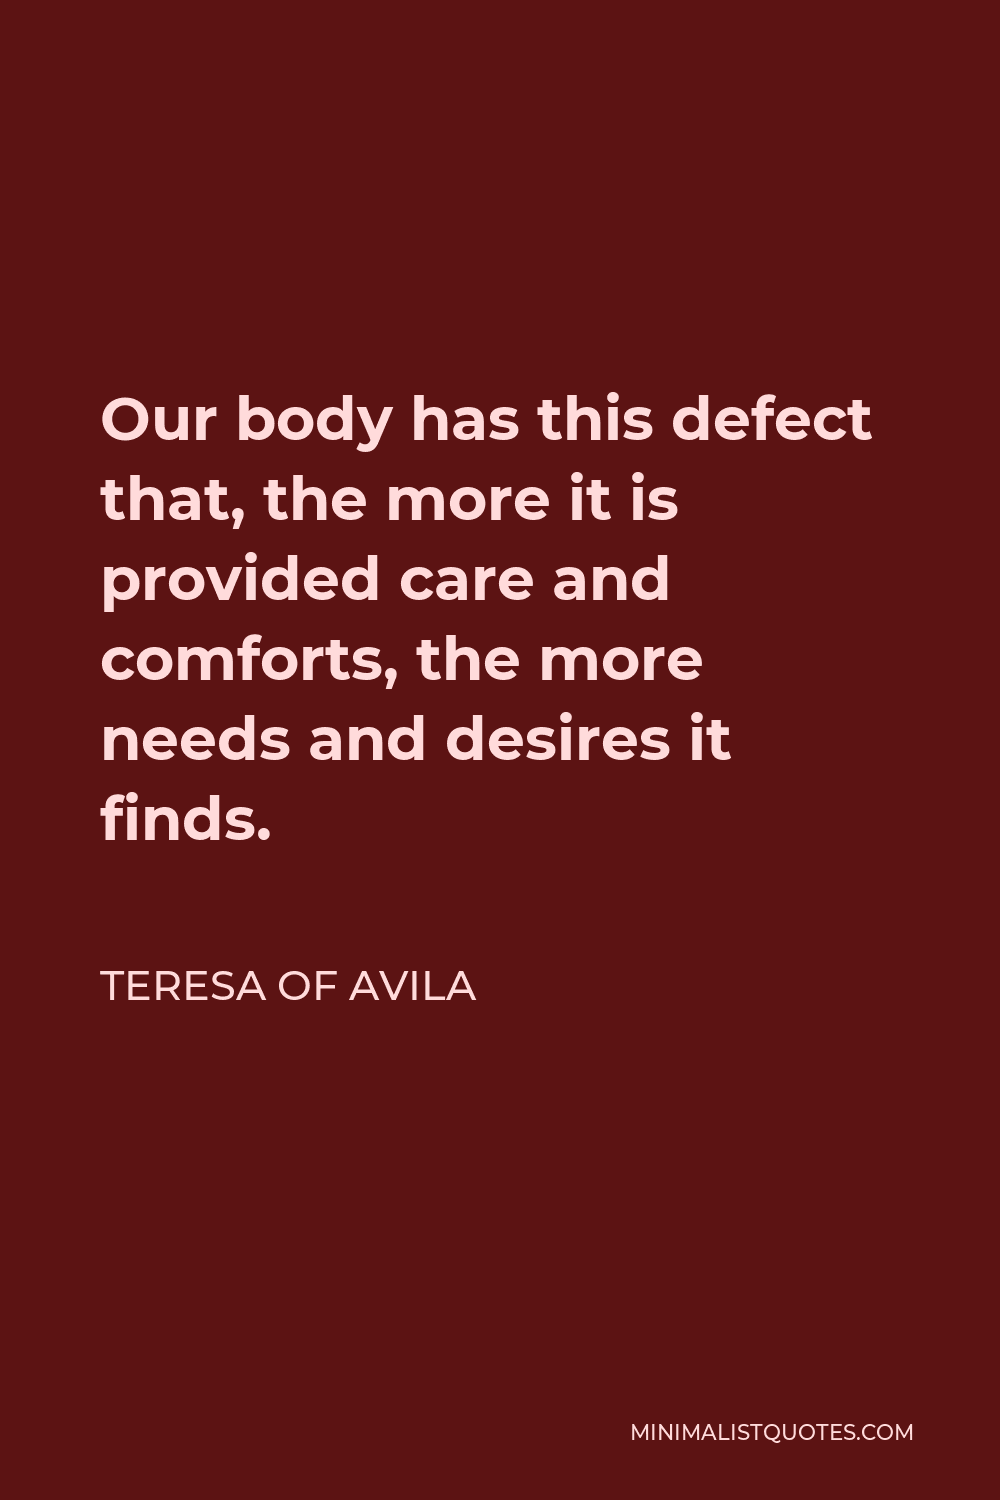 Teresa of Avila Quote - Our body has this defect that, the more it is provided care and comforts, the more needs and desires it finds.